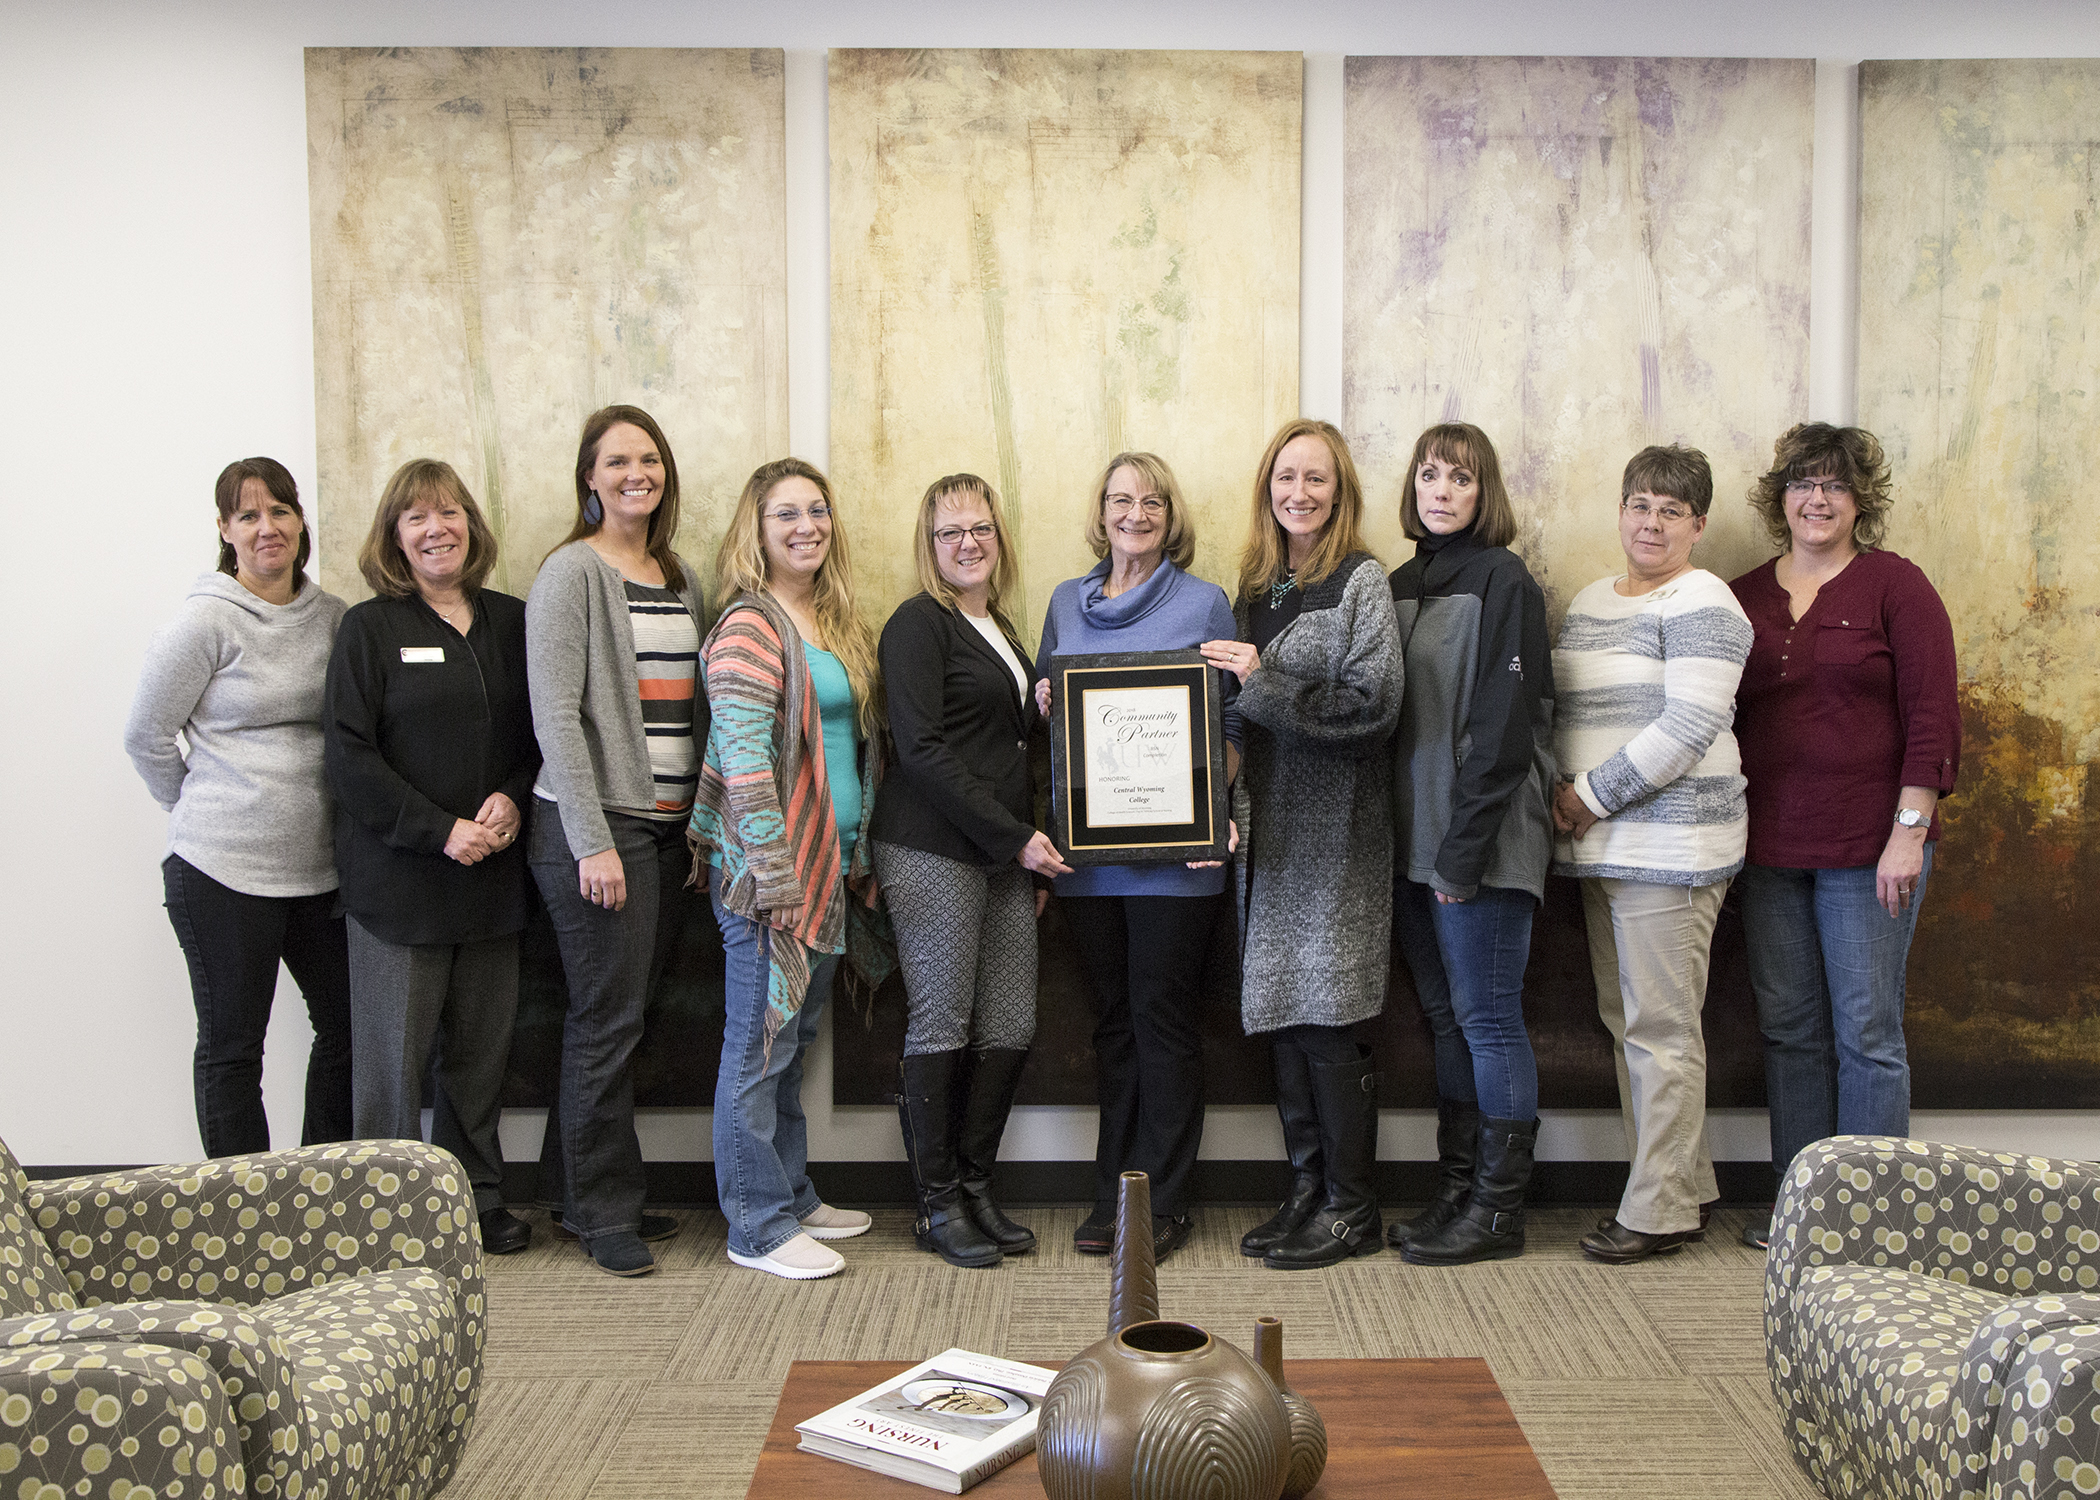 The CWC nursing staff stands holding an award from UW